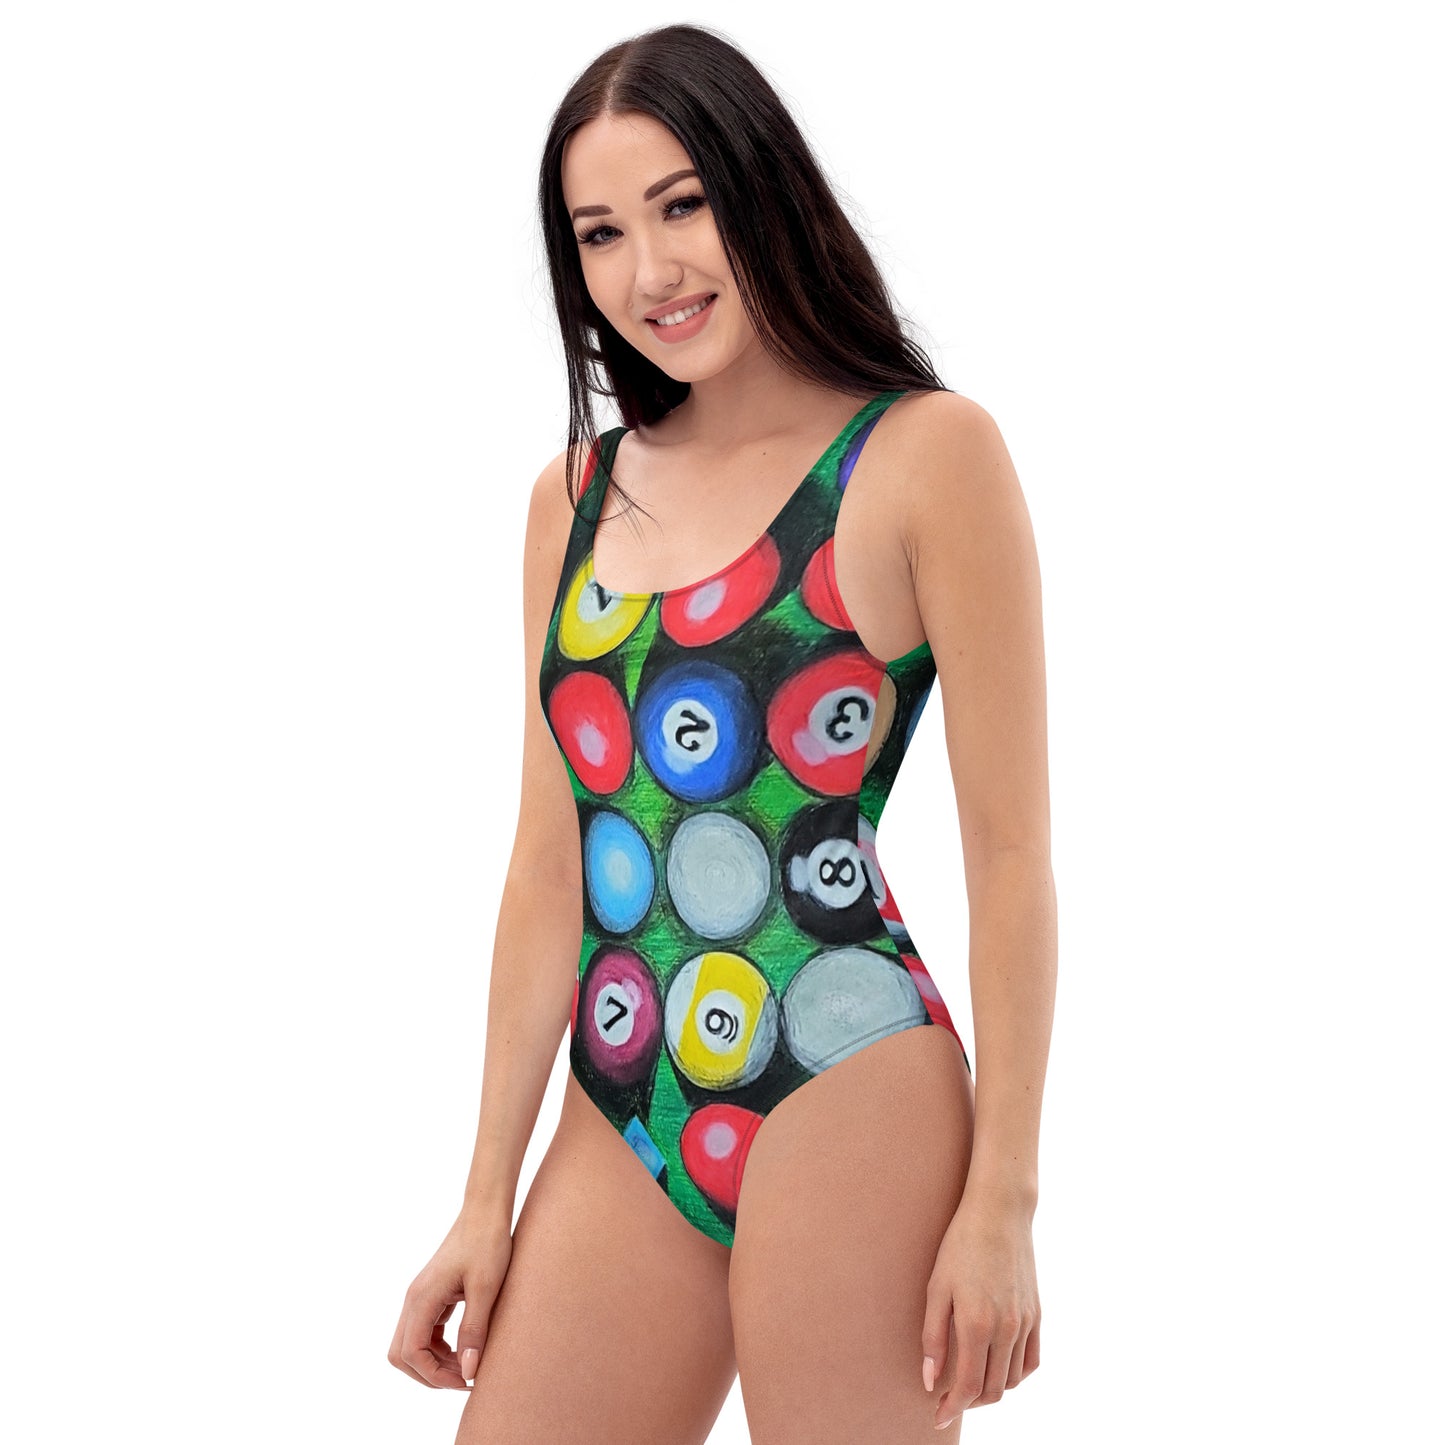 38 Balls and a Chalk One-Piece Swimsuit